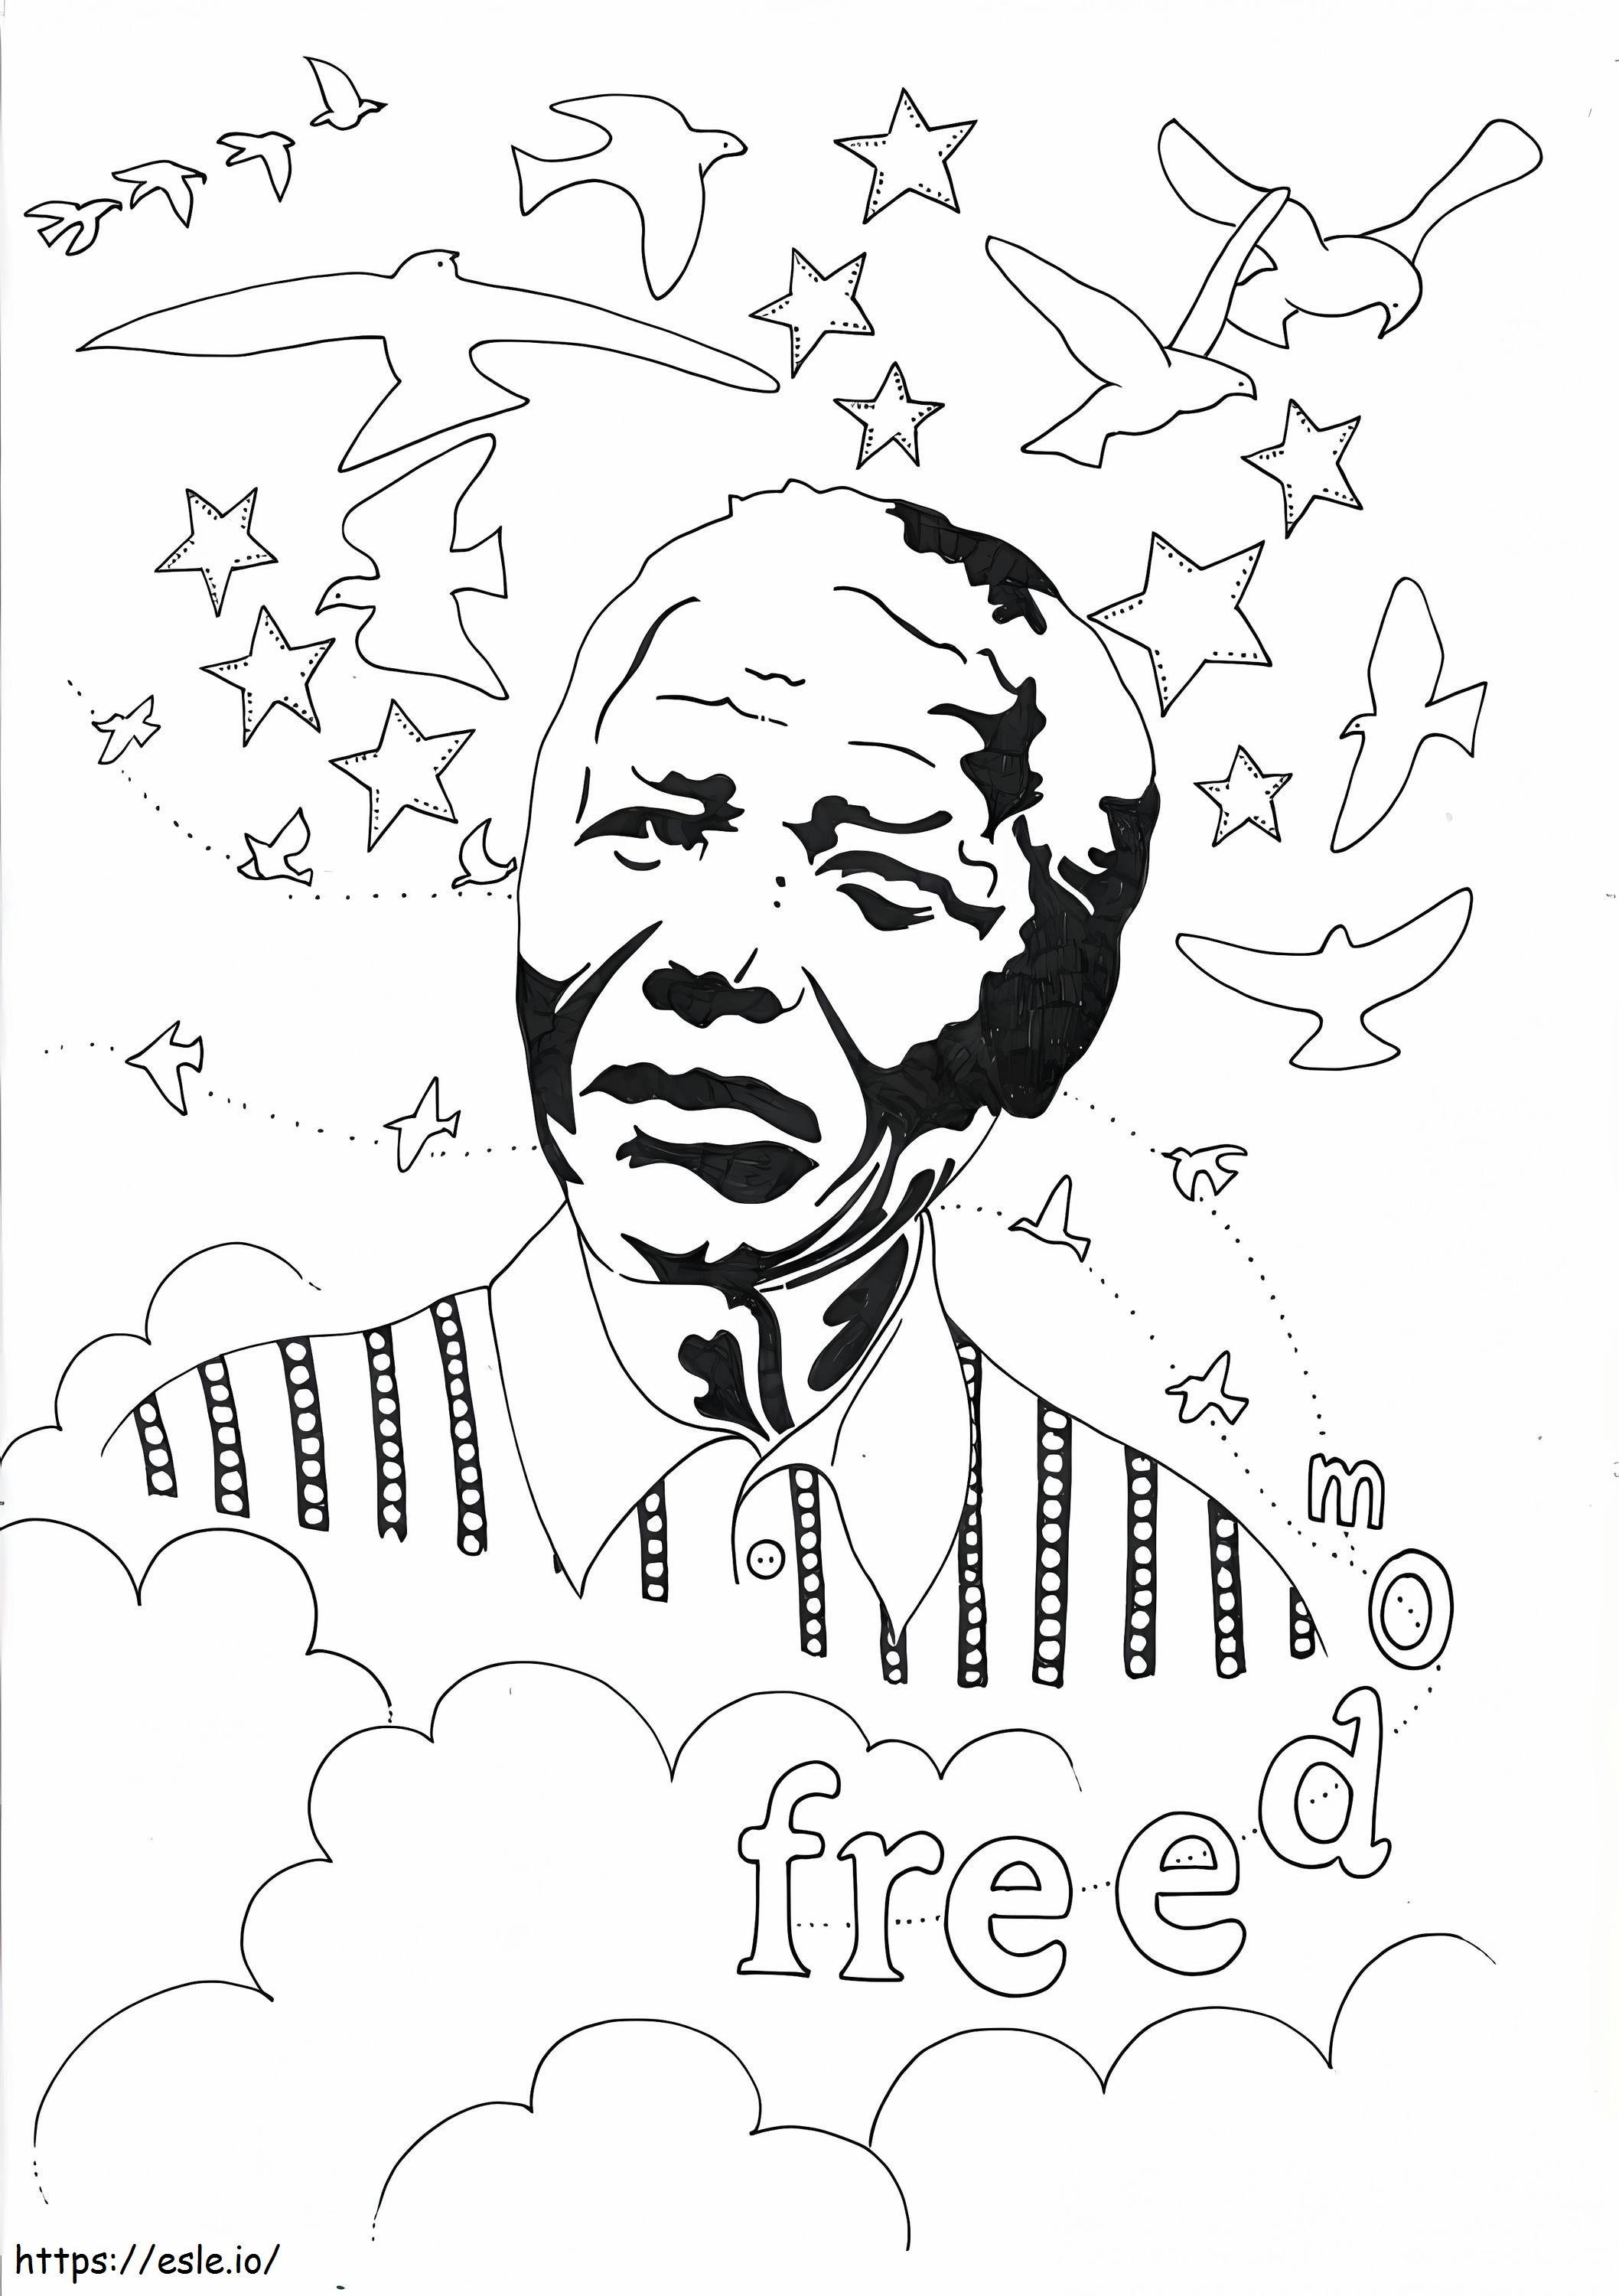 Nelson Mandela 1 coloring page